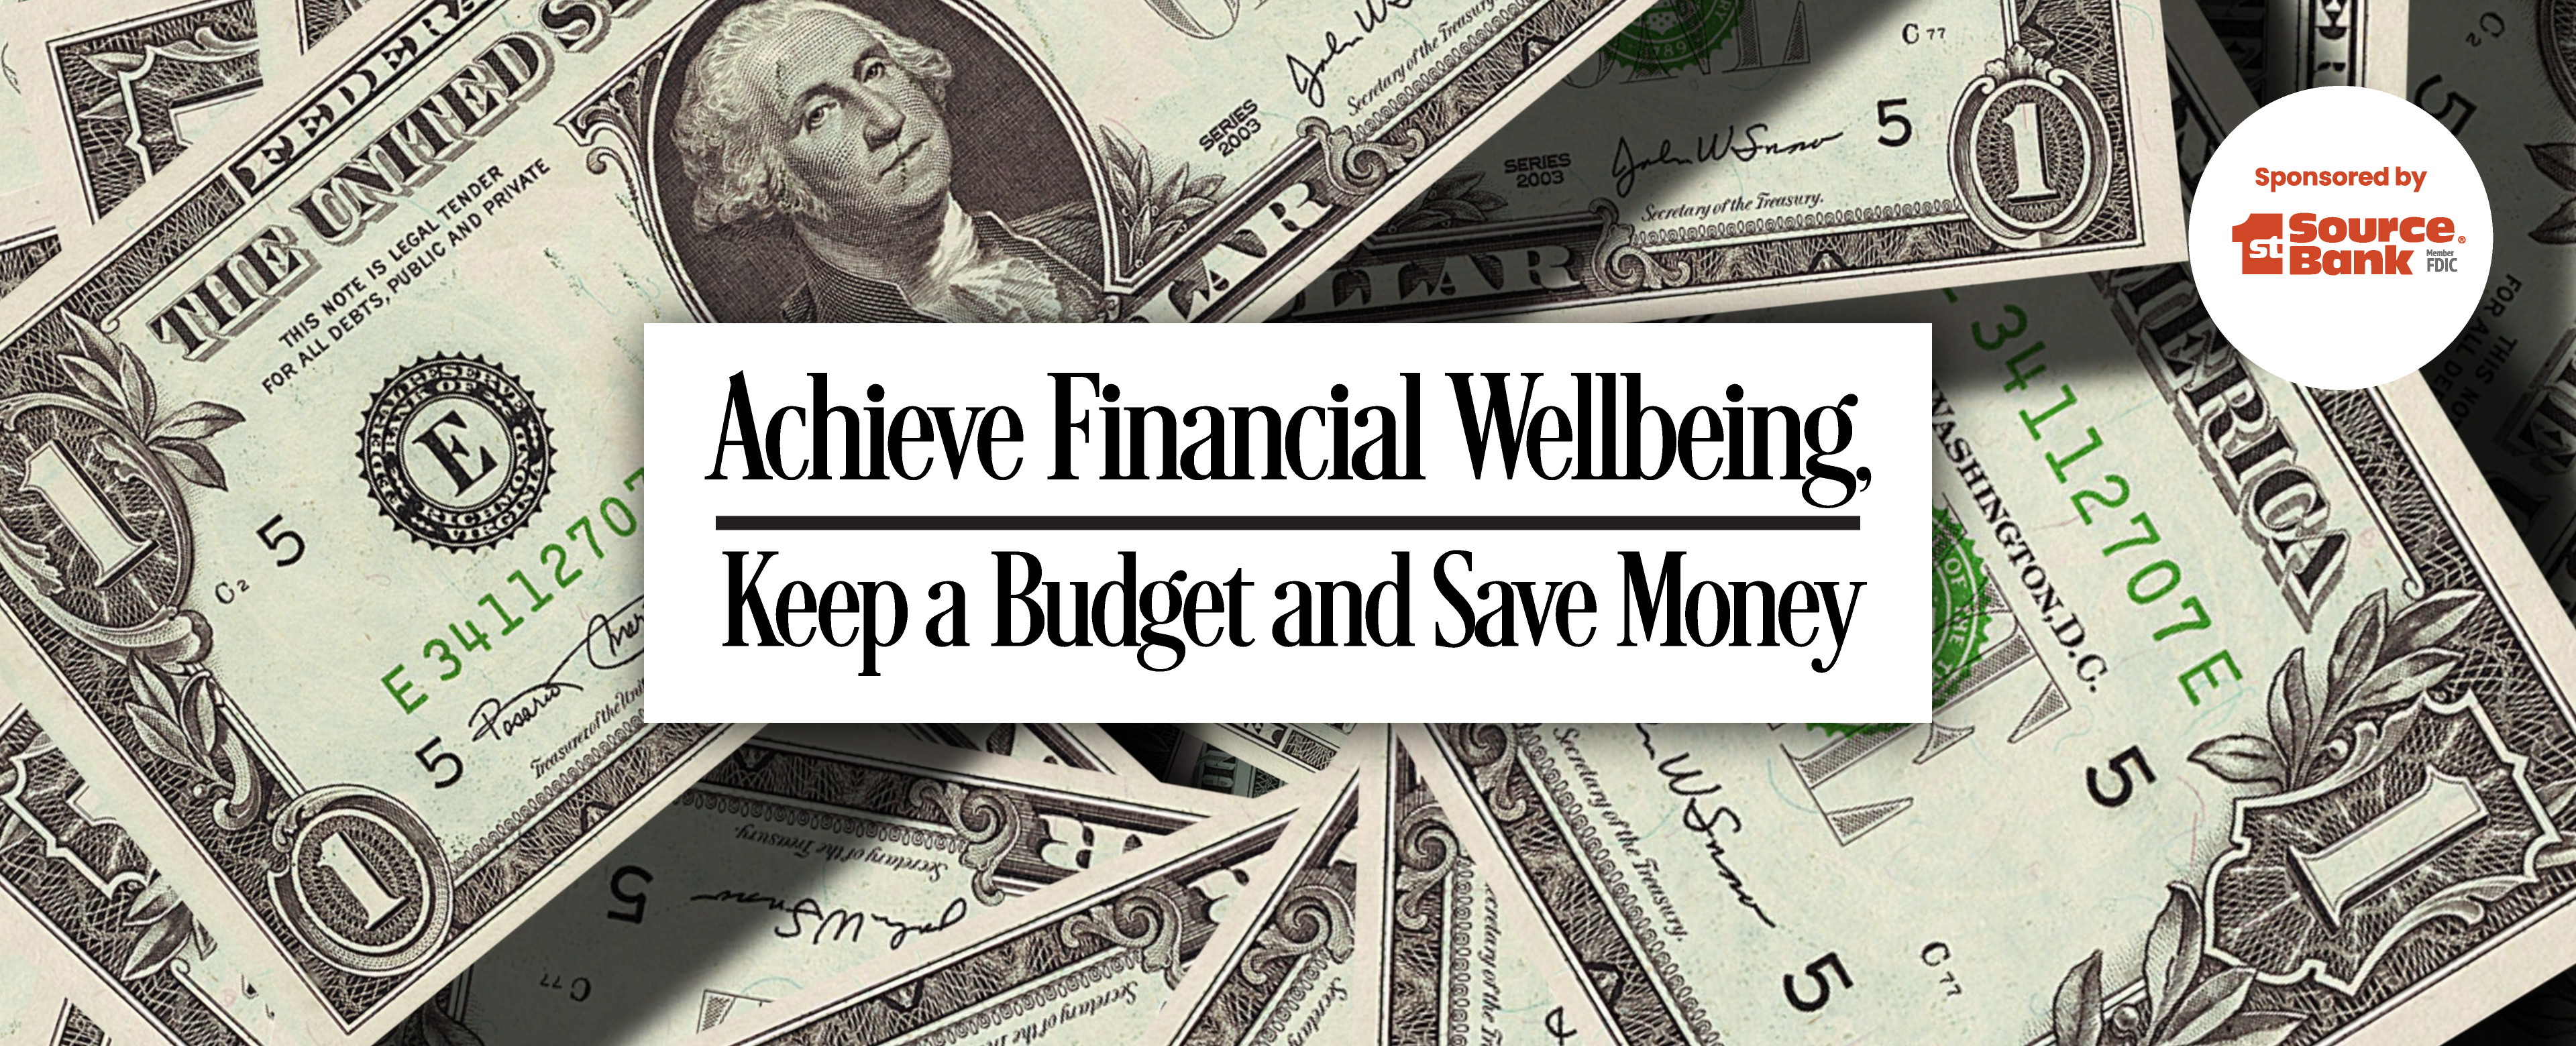 Achieve Financial Well-being, Keep a Budget and Save Money